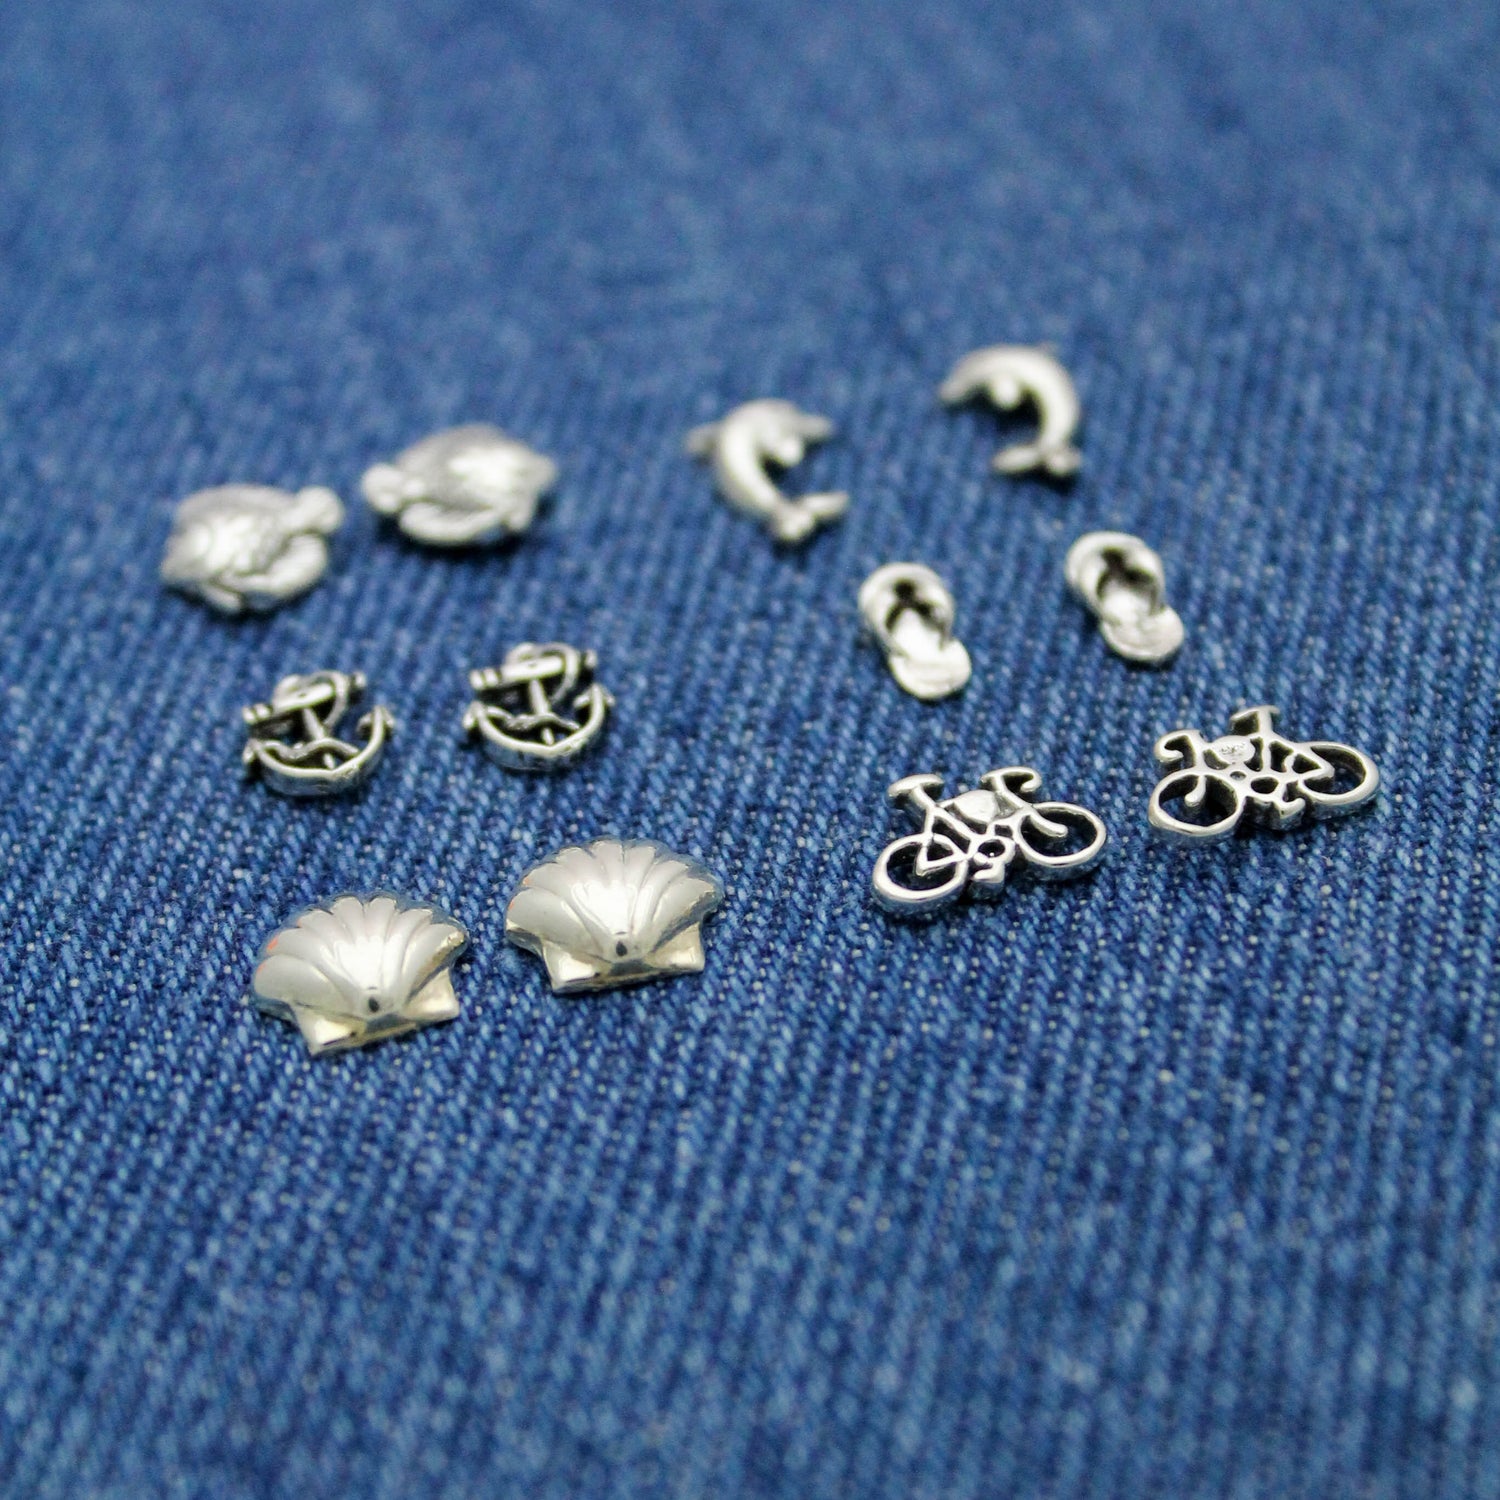 Cute Beach Studs in Sterling Silver, Shells, Anchors, Tropical Fish, Dolphins, Flip Flops, & Bicycles, Silver Stud Earrings, Gift for Her